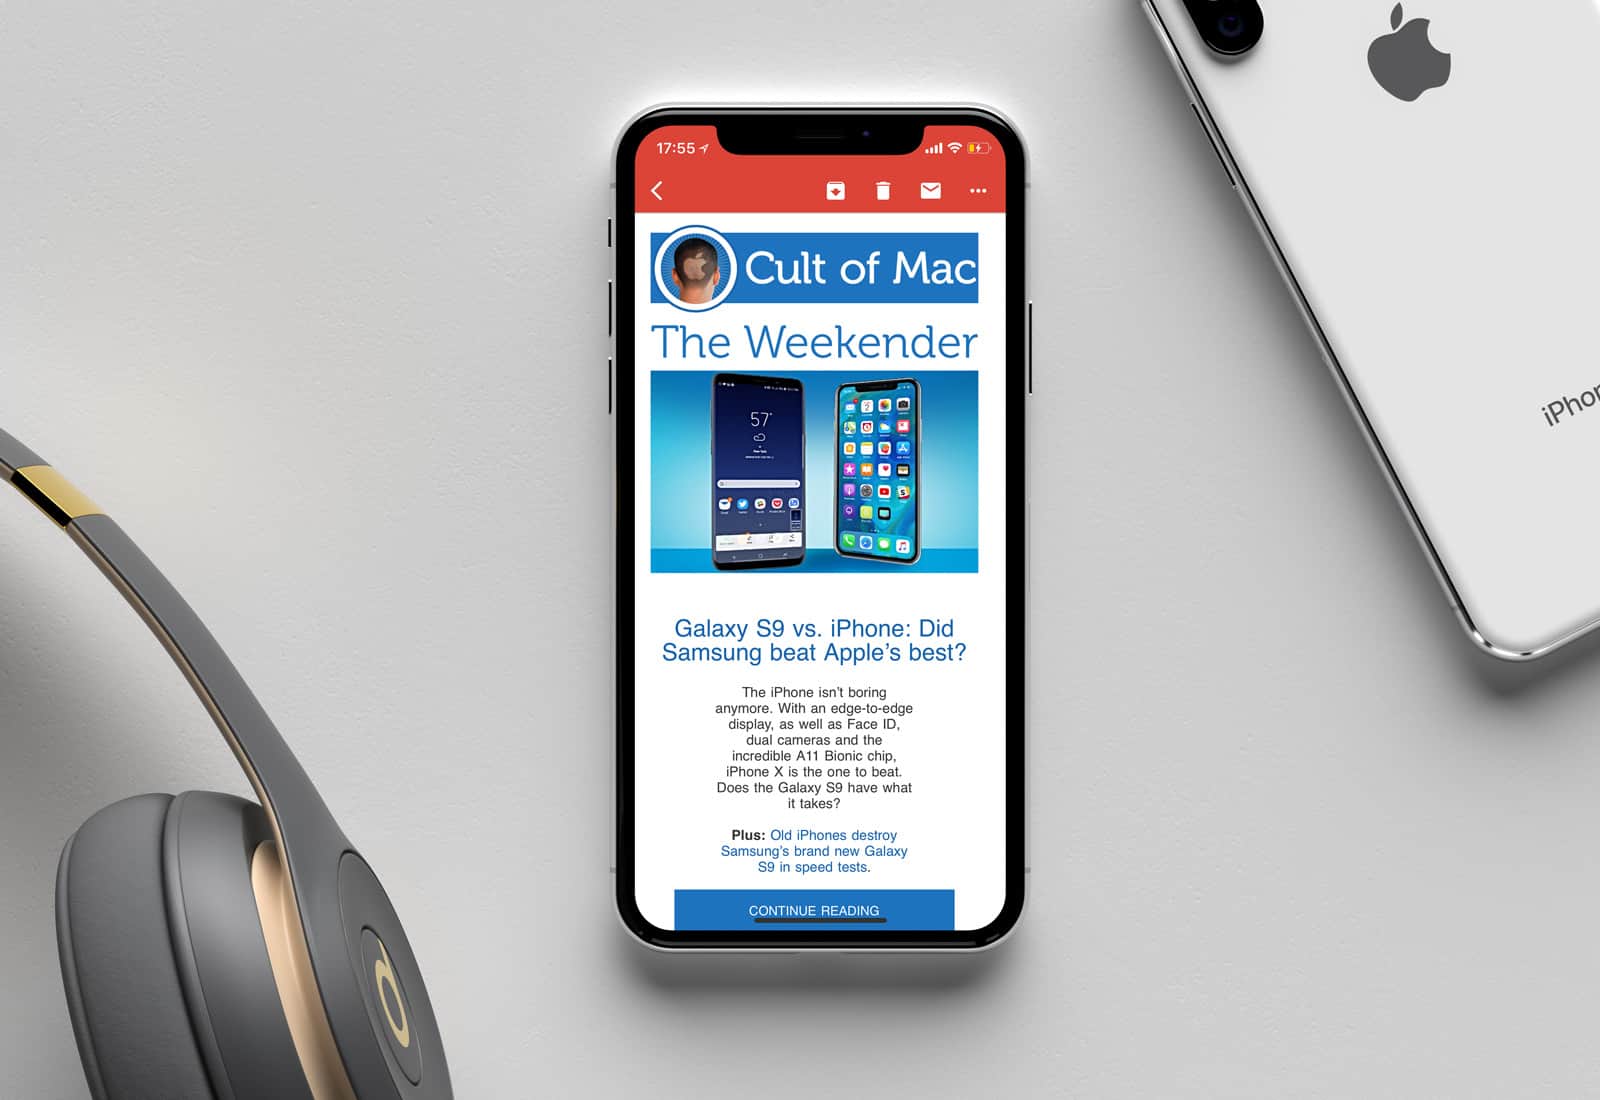 Sign up for Cult of Mac weekly newsletter The Weekender for Apple news, reviews and how-tos.